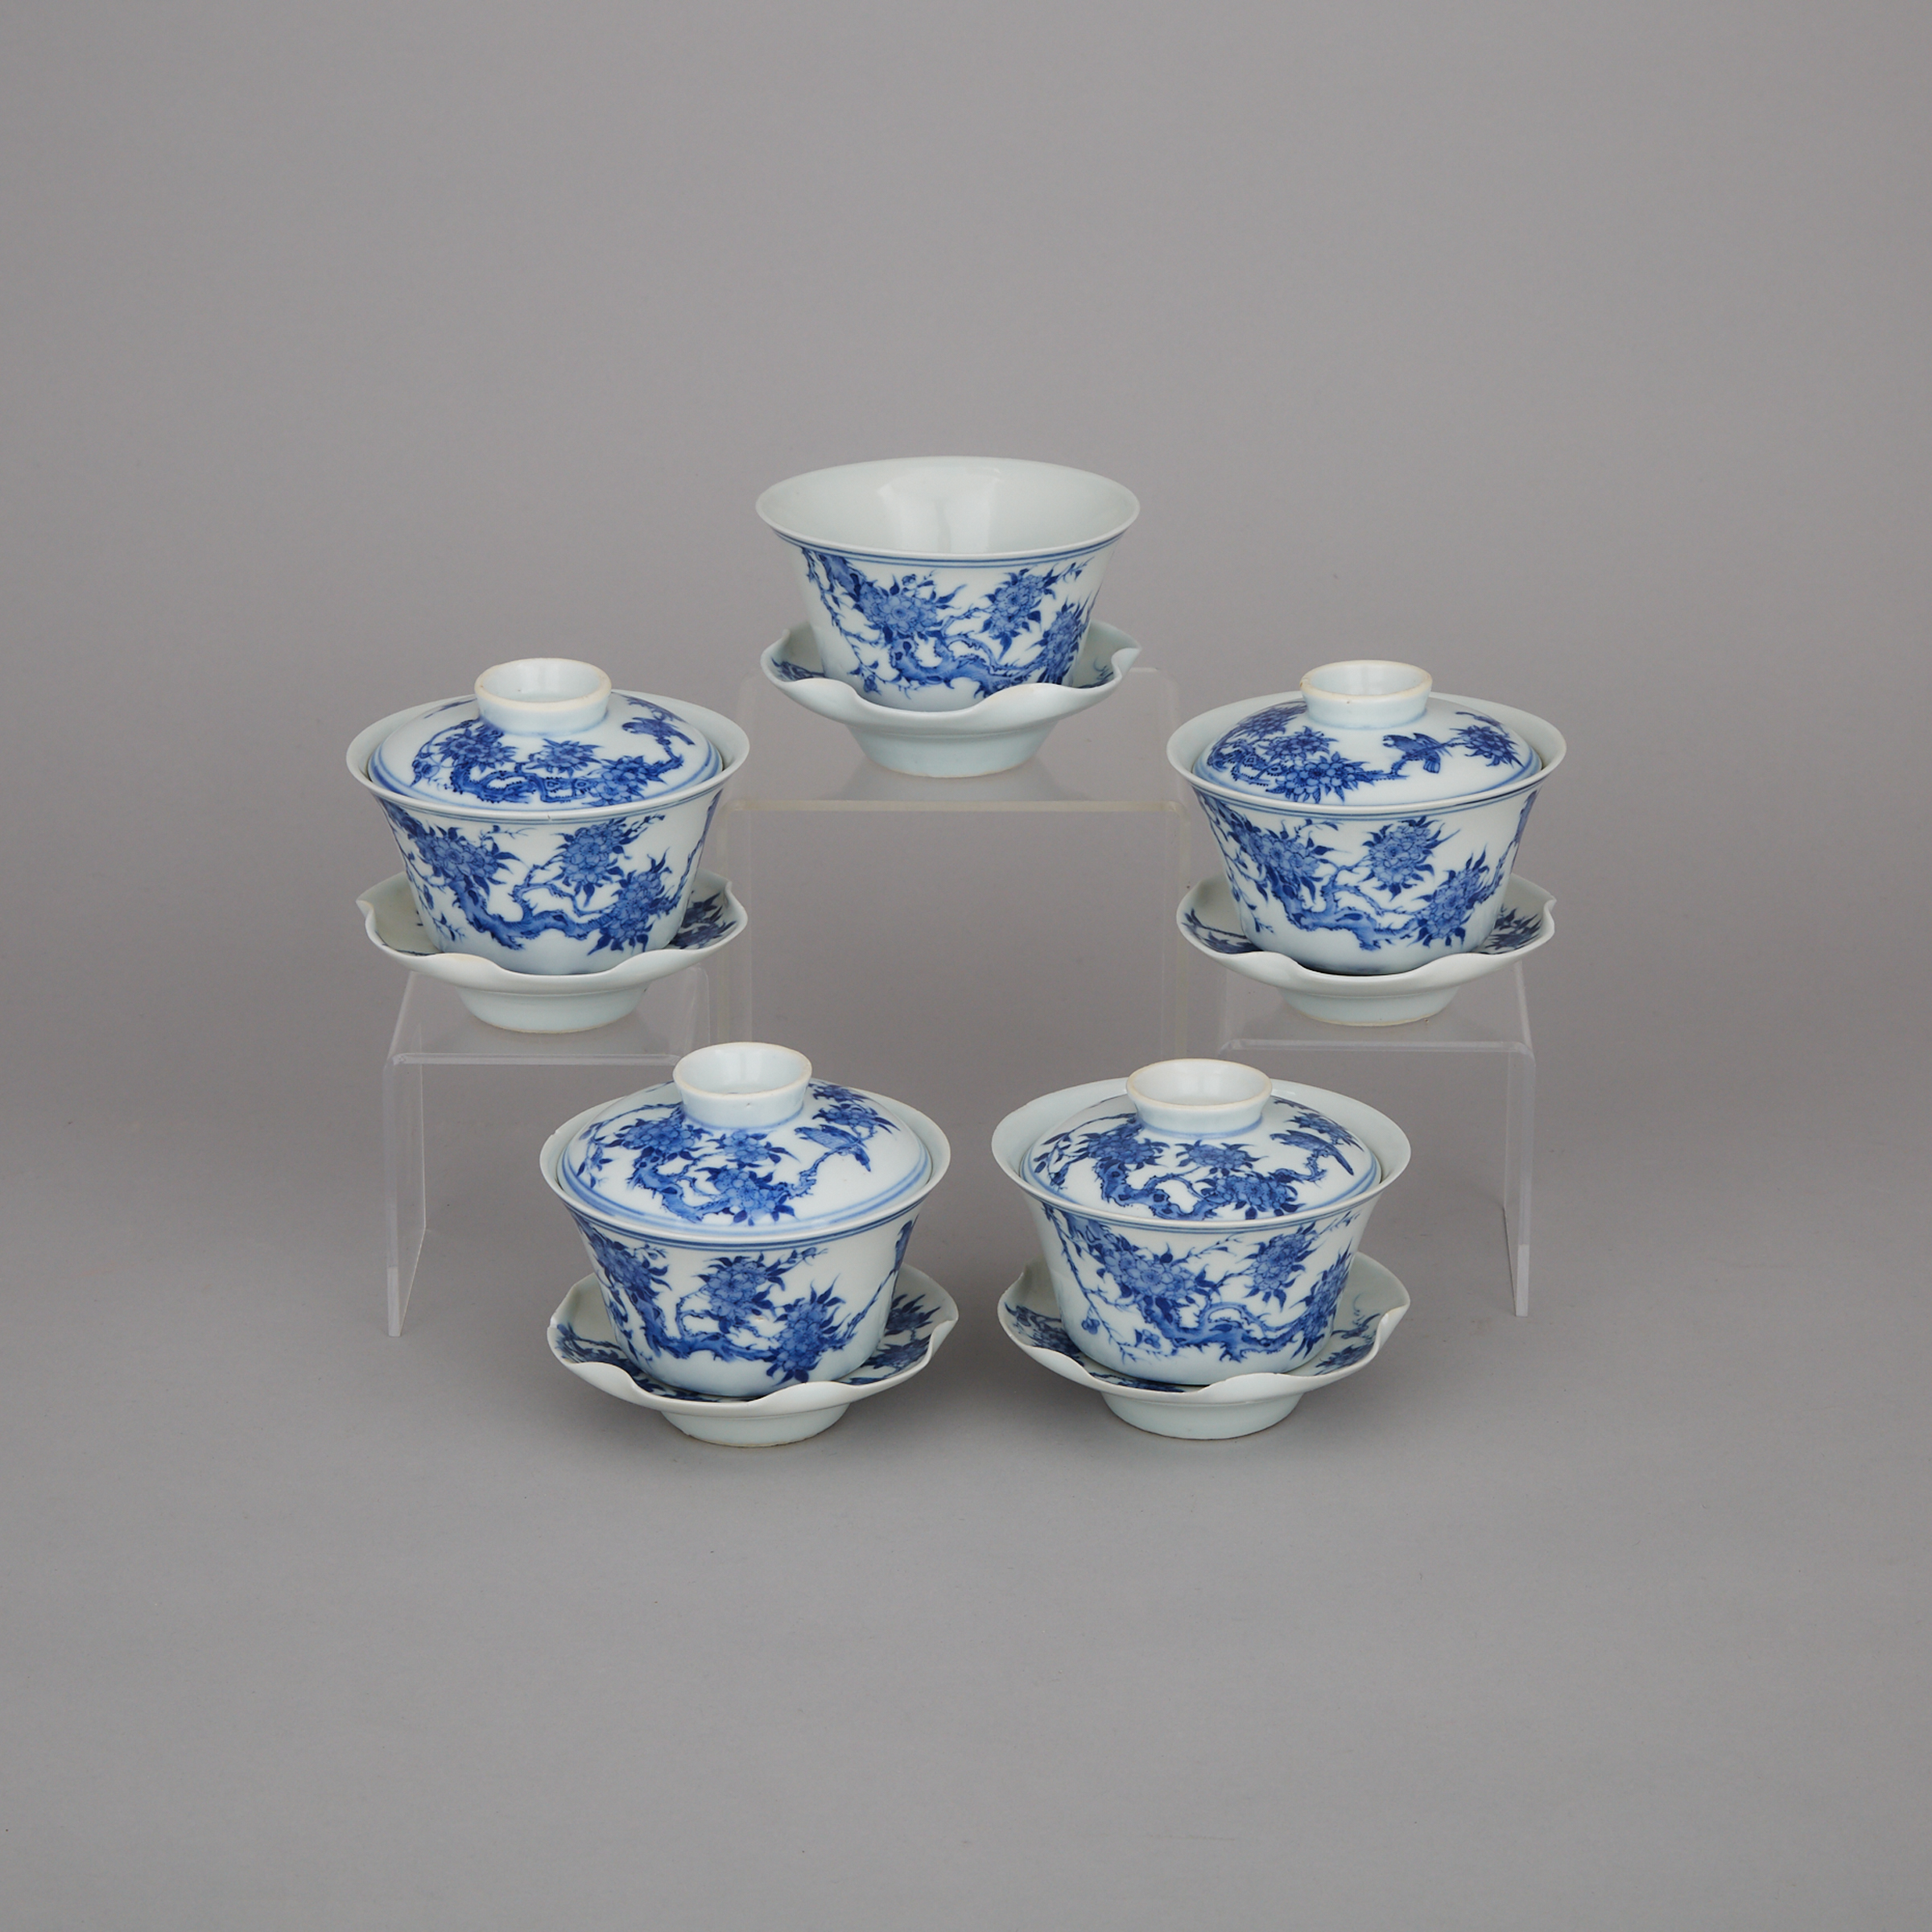 A Set of Five Blue and White Lidded Tea Cups